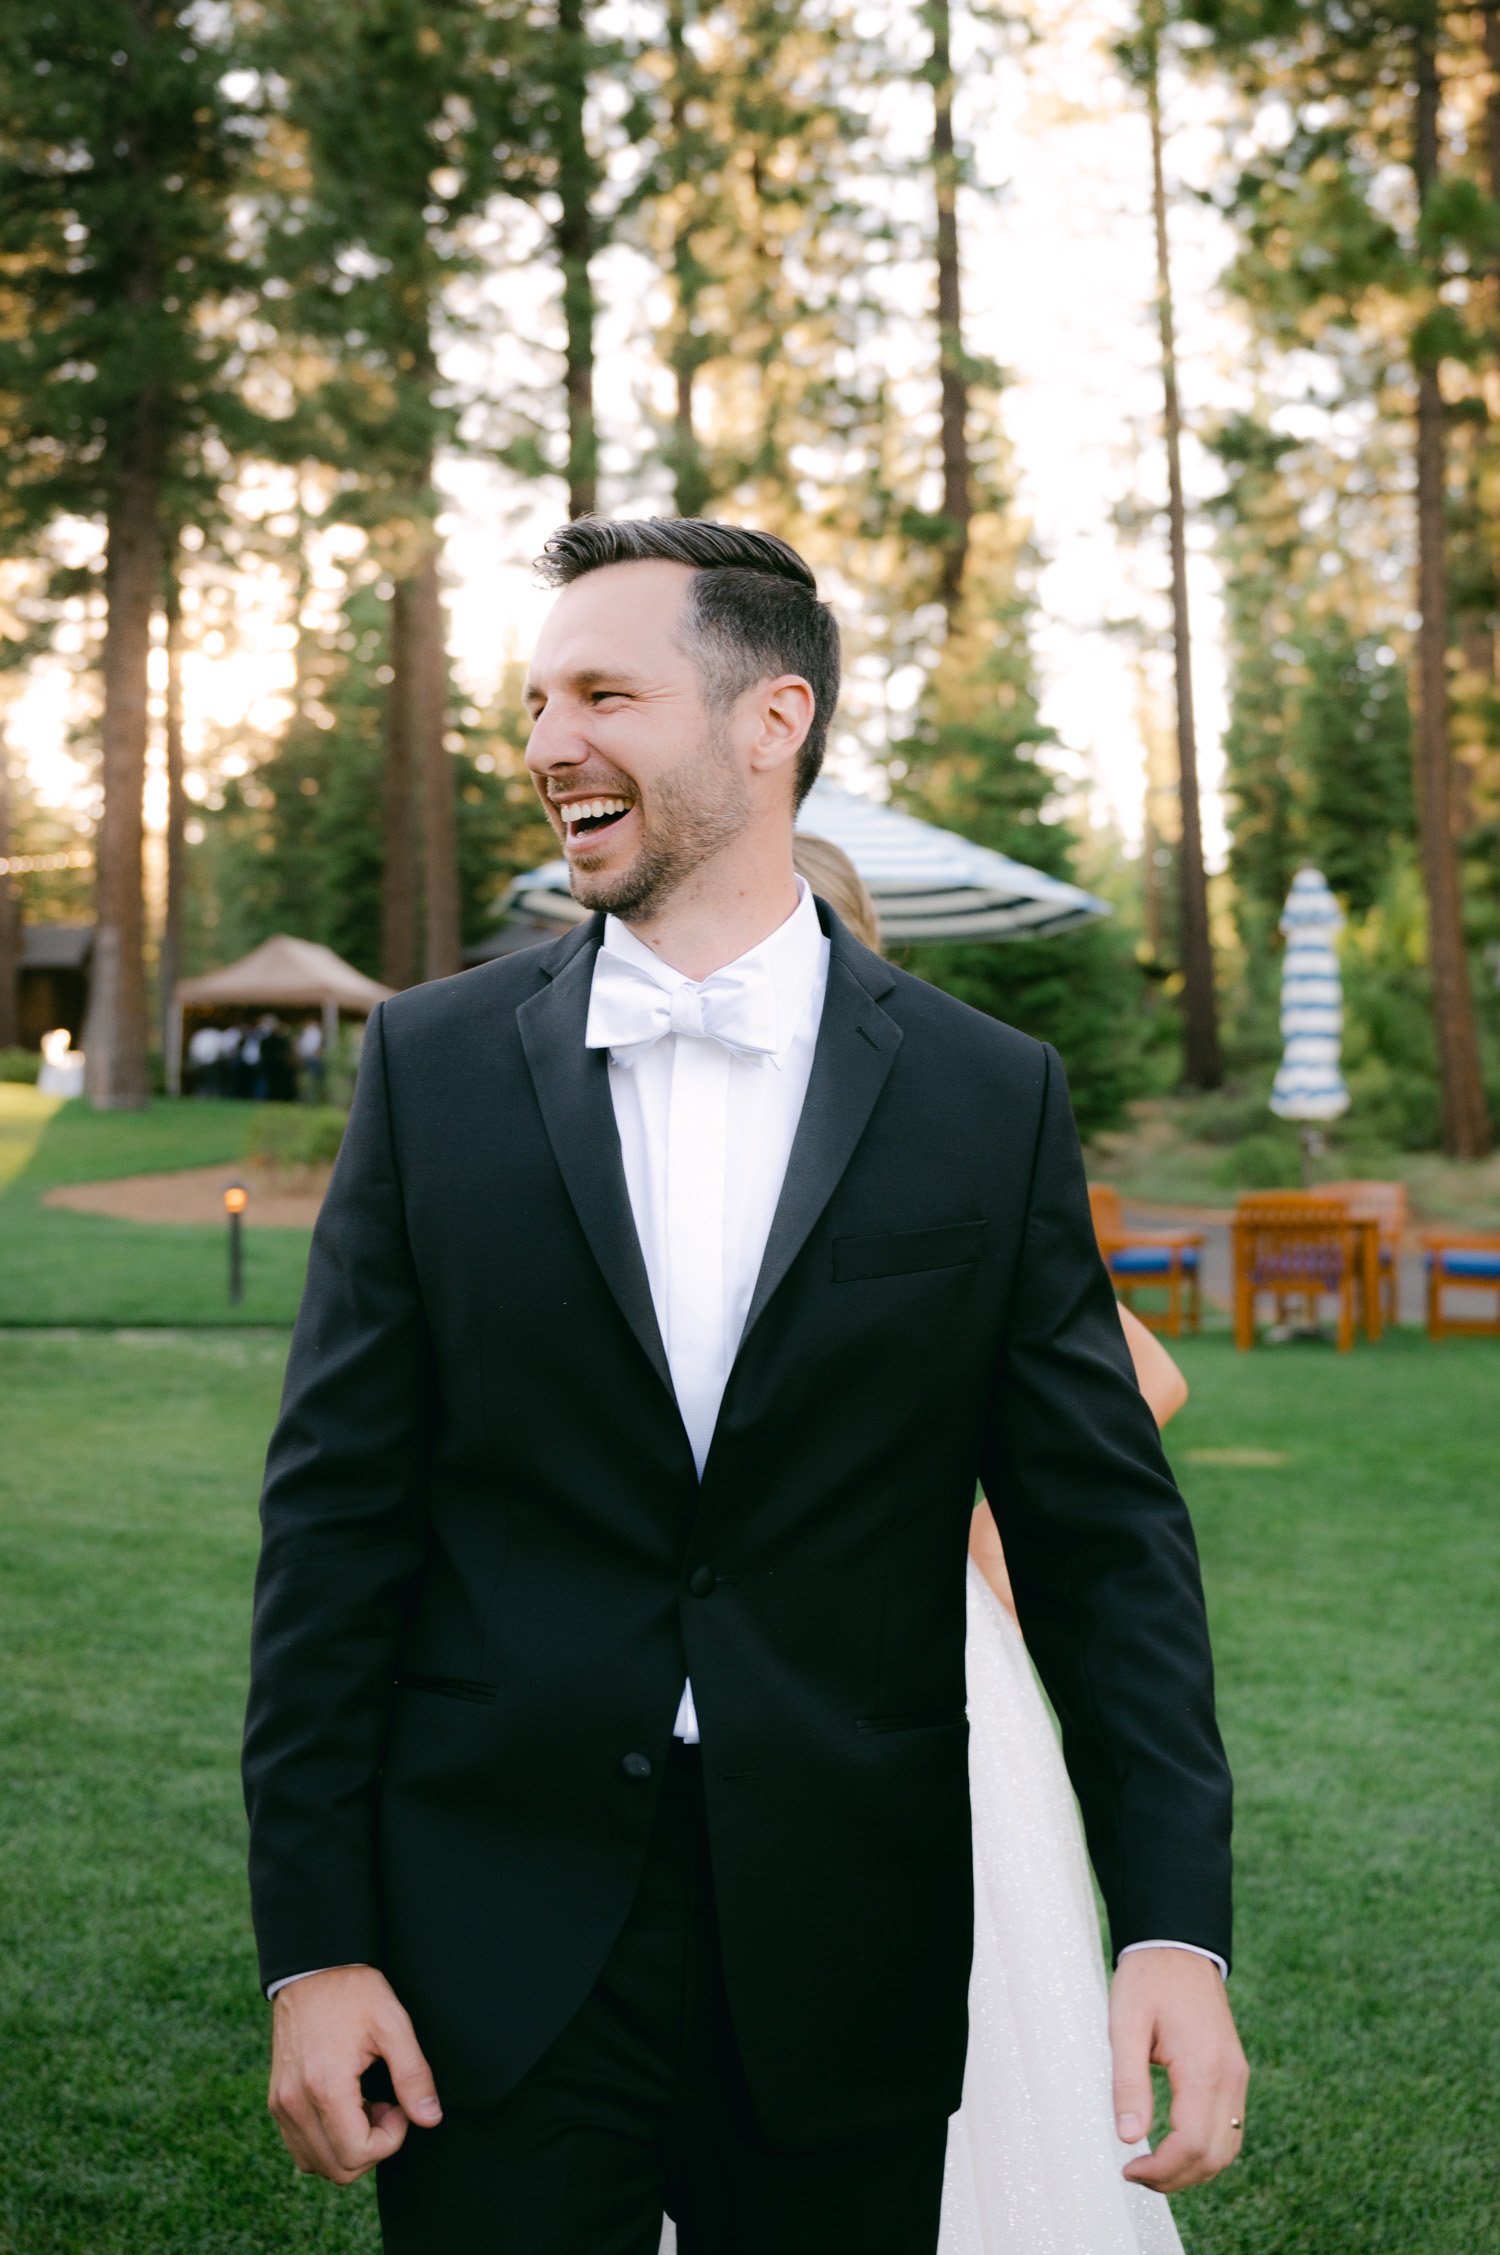 Martis Camp wedding photo of a candid photo of a groom